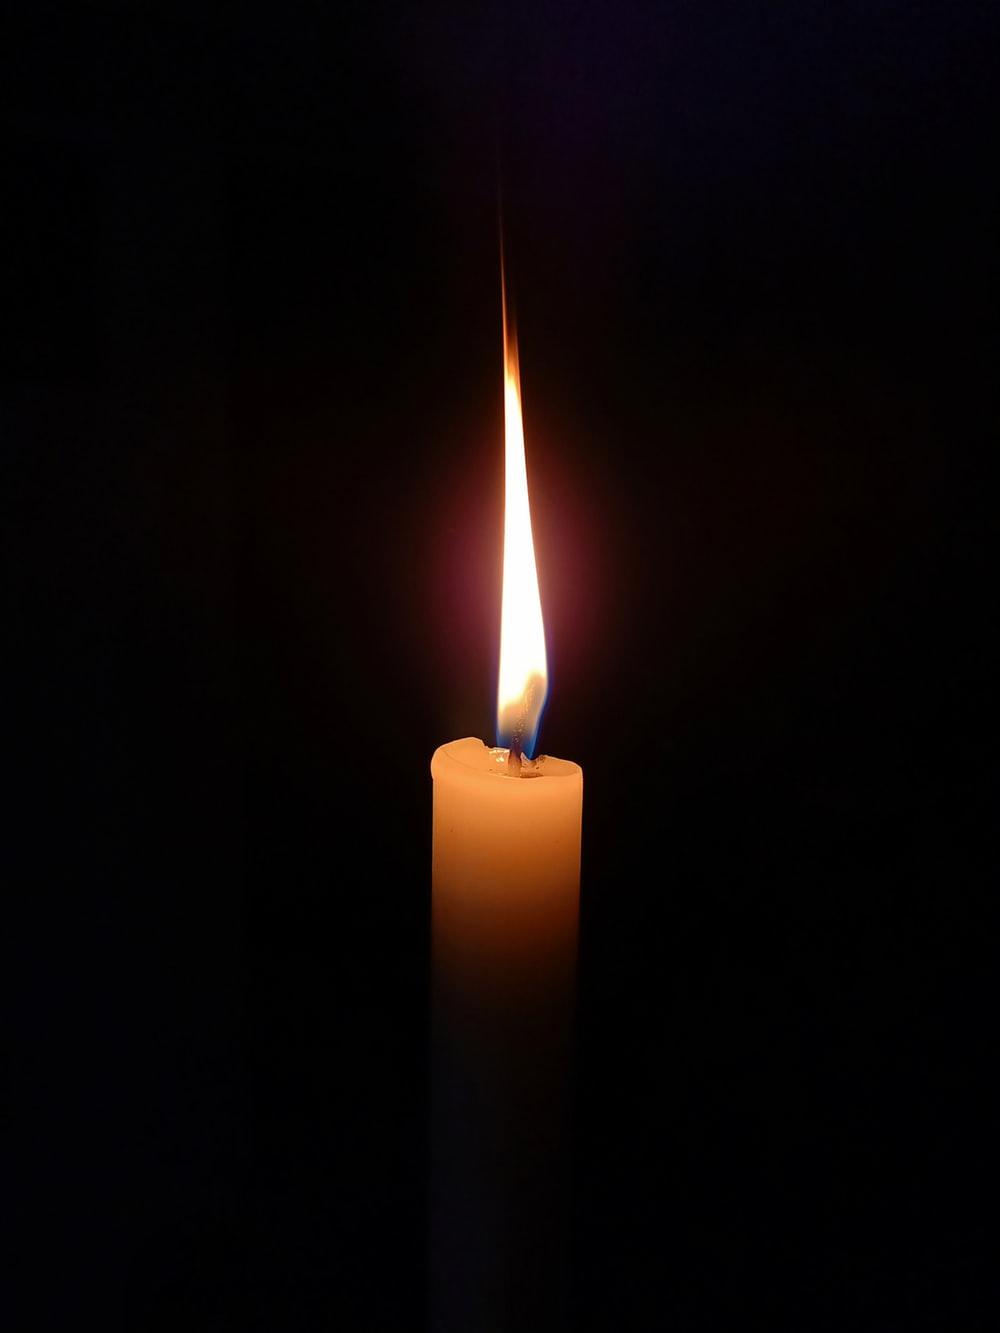 Candle Picture. Download Free Image